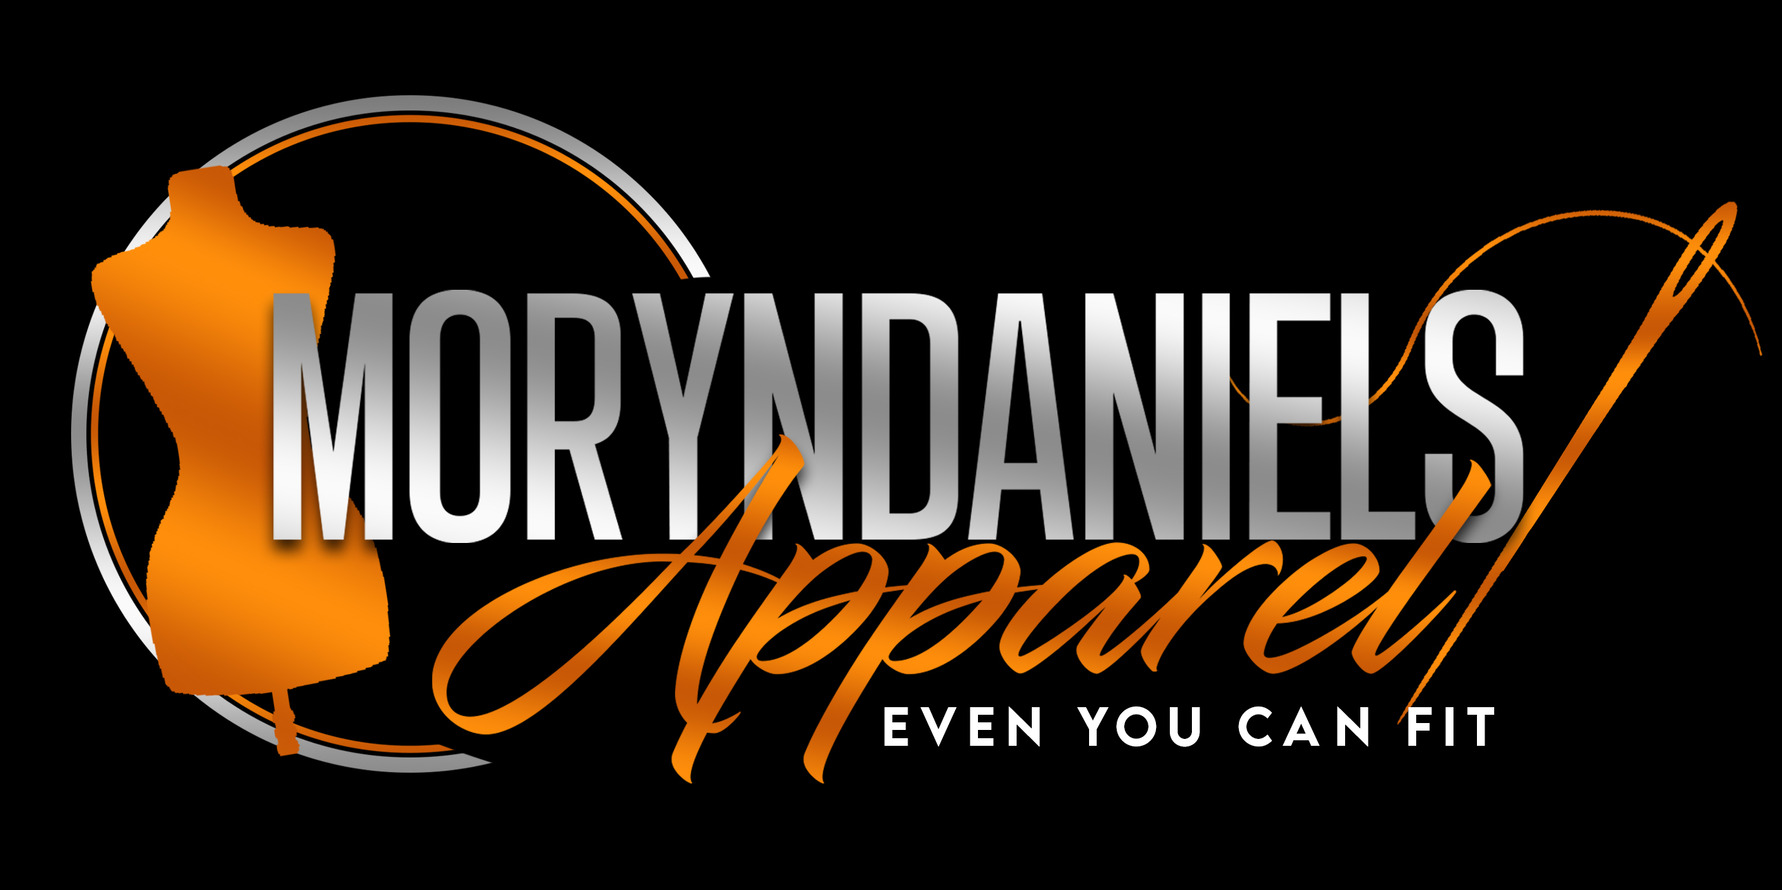 Welcome to Moryndaniels Apparel - Where Style Meets Comfort for Children and Teens!